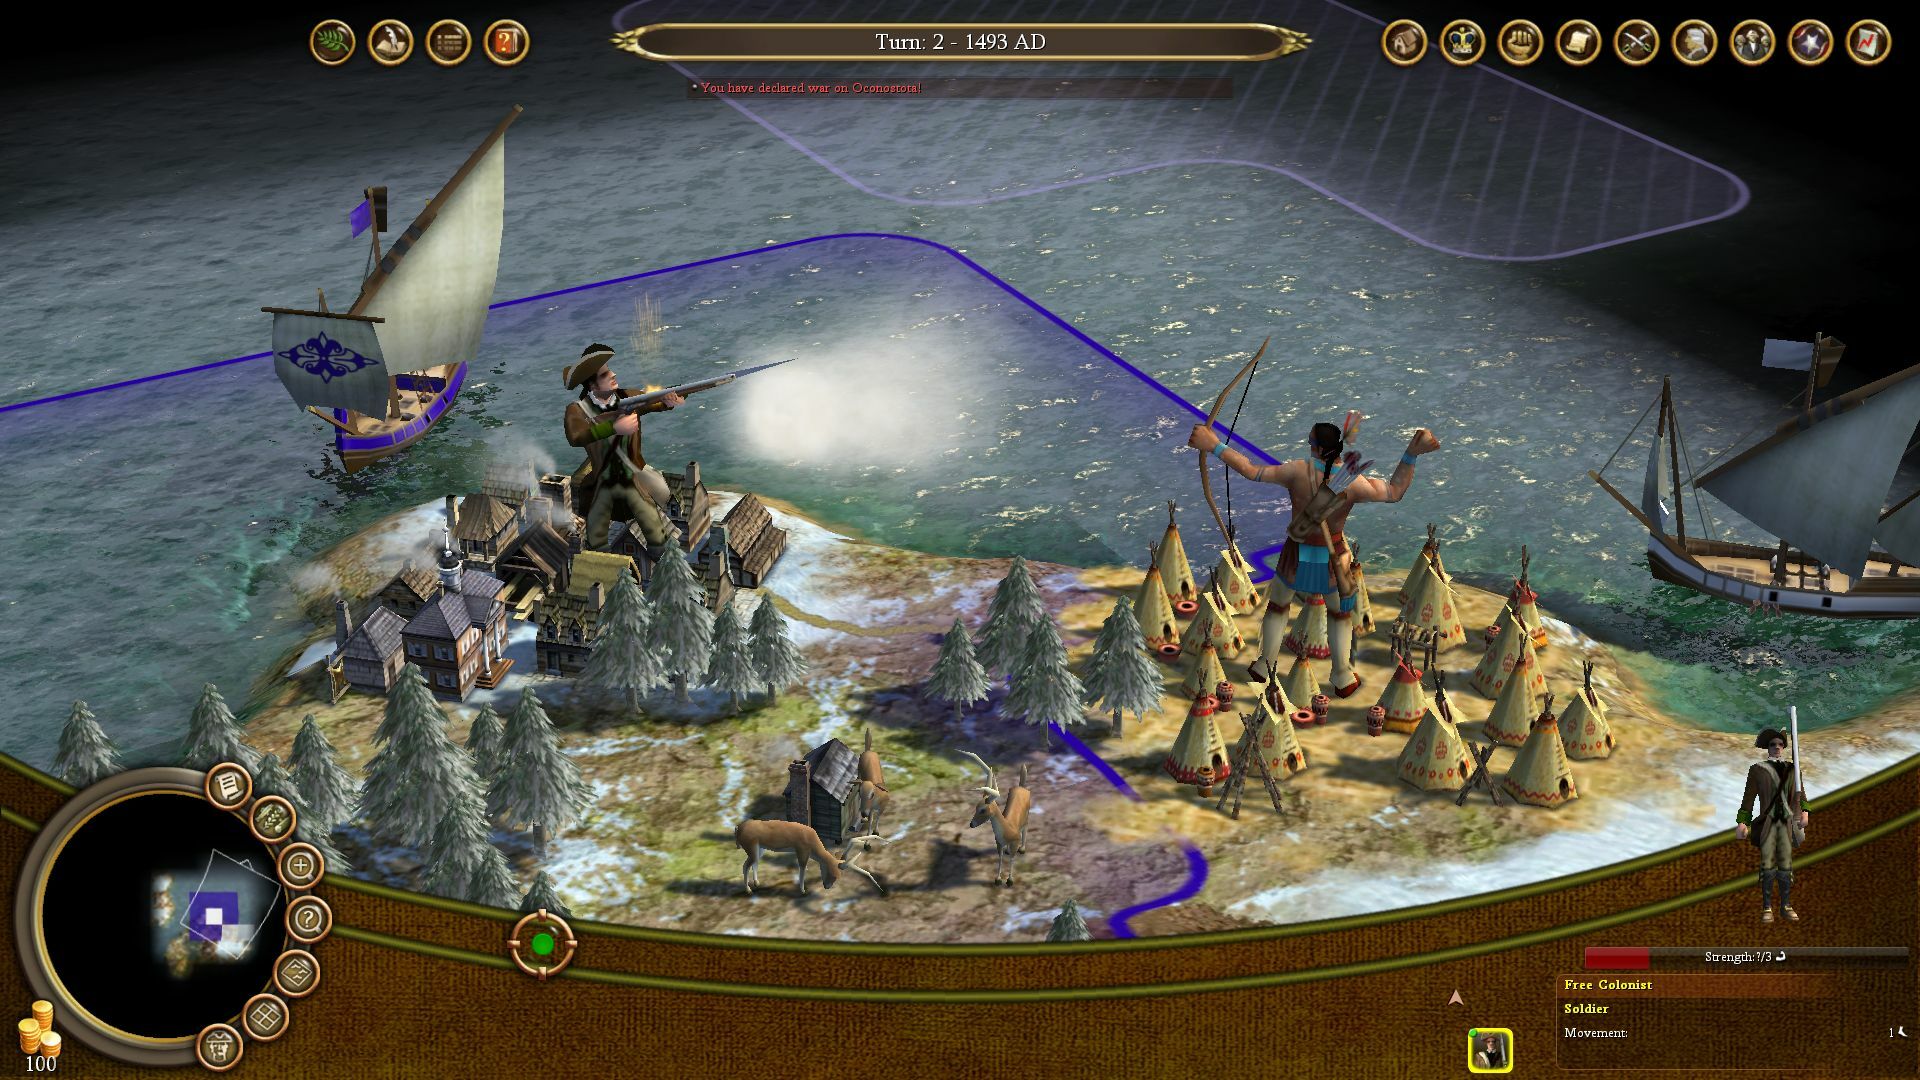 System-Driven Design example: Combat system in Civilization IV game